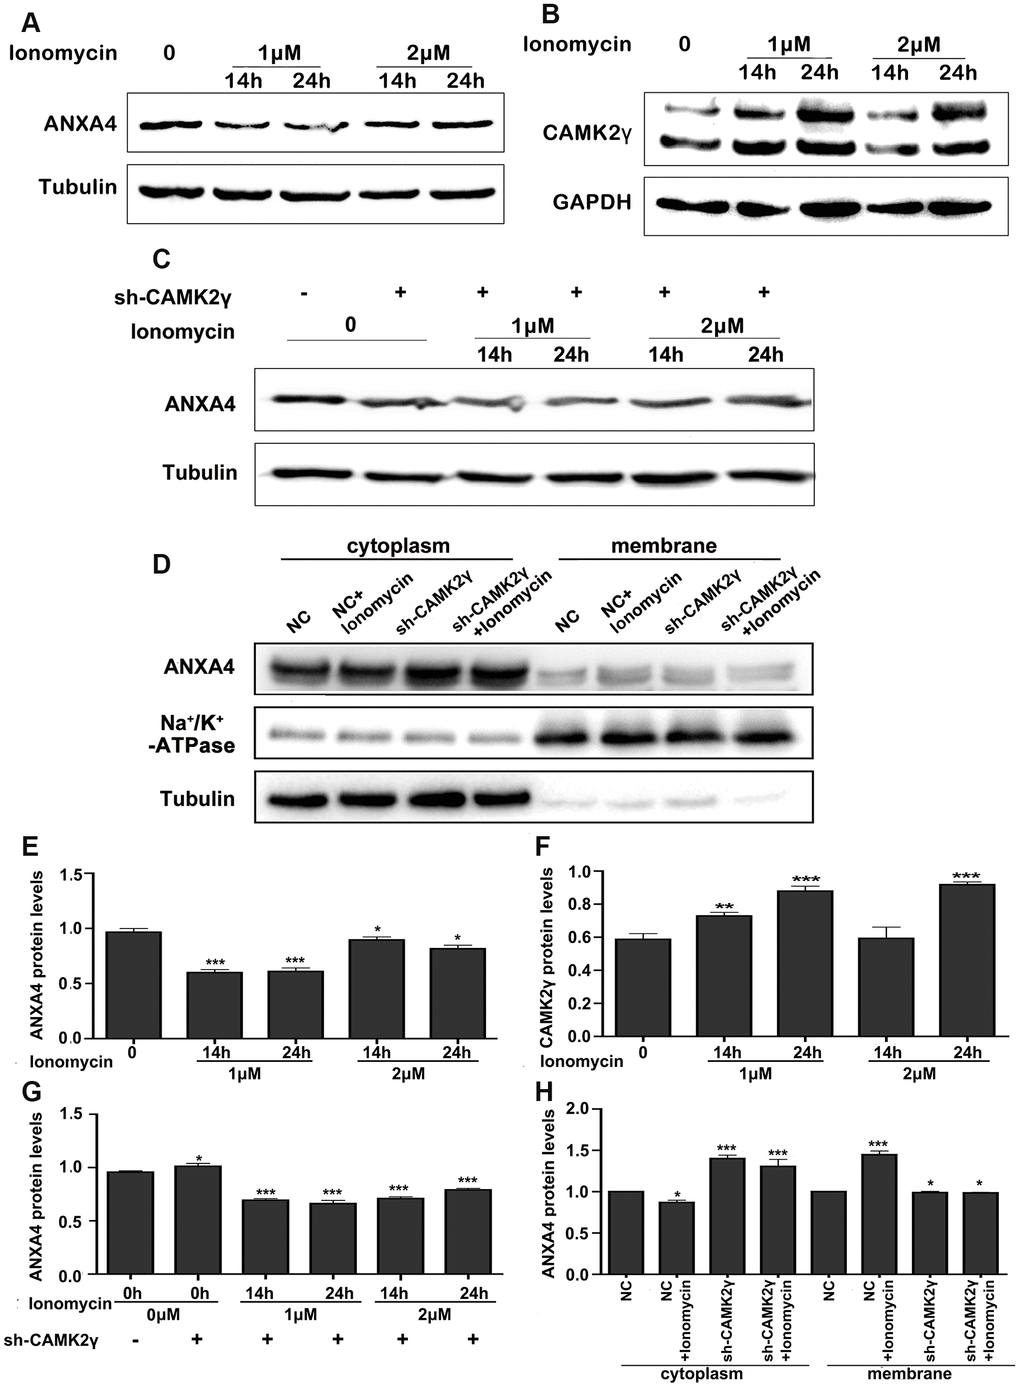 Calcium regulated the expression and location of ANXA4. (A) Time-course expression analysis of ANXA4 after the addition of the Ca2+ agonist ionomycin (1 μM or 2 μM) at 14 h and 24 h. Tubulin was used as the loading control for total protein. *p B) Time-course expression analysis of CAMK2γ after the addition of the Ca2+ agonist ionomycin (1 μM or 2 μM) at 14 h and 24 h. Tubulin was used as the loading control for total protein. *p C) Time-course expression analysis of ANXA4 in HT-29 cells transfected with CAMK2γ after the addition of the Ca2+ agonist ionomycin (1 μM or 2 μM) at 14 h and 24 h. Tubulin was used as the loading control for total protein. *p D) Membrane and cytoplasmic levels of ANXA4 in HT-29 cells transfected with CAMK2γ after the addition of the Ca2+ agonist ionomycin (1 μM) at 14 h. Na/K-ATPase was used as the loading control for cell membrane protein; Tubulin was used as the loading control for total protein. *p E–H) Relative quantitative of comparison of WB analysis mentioned in (A–D). *p 